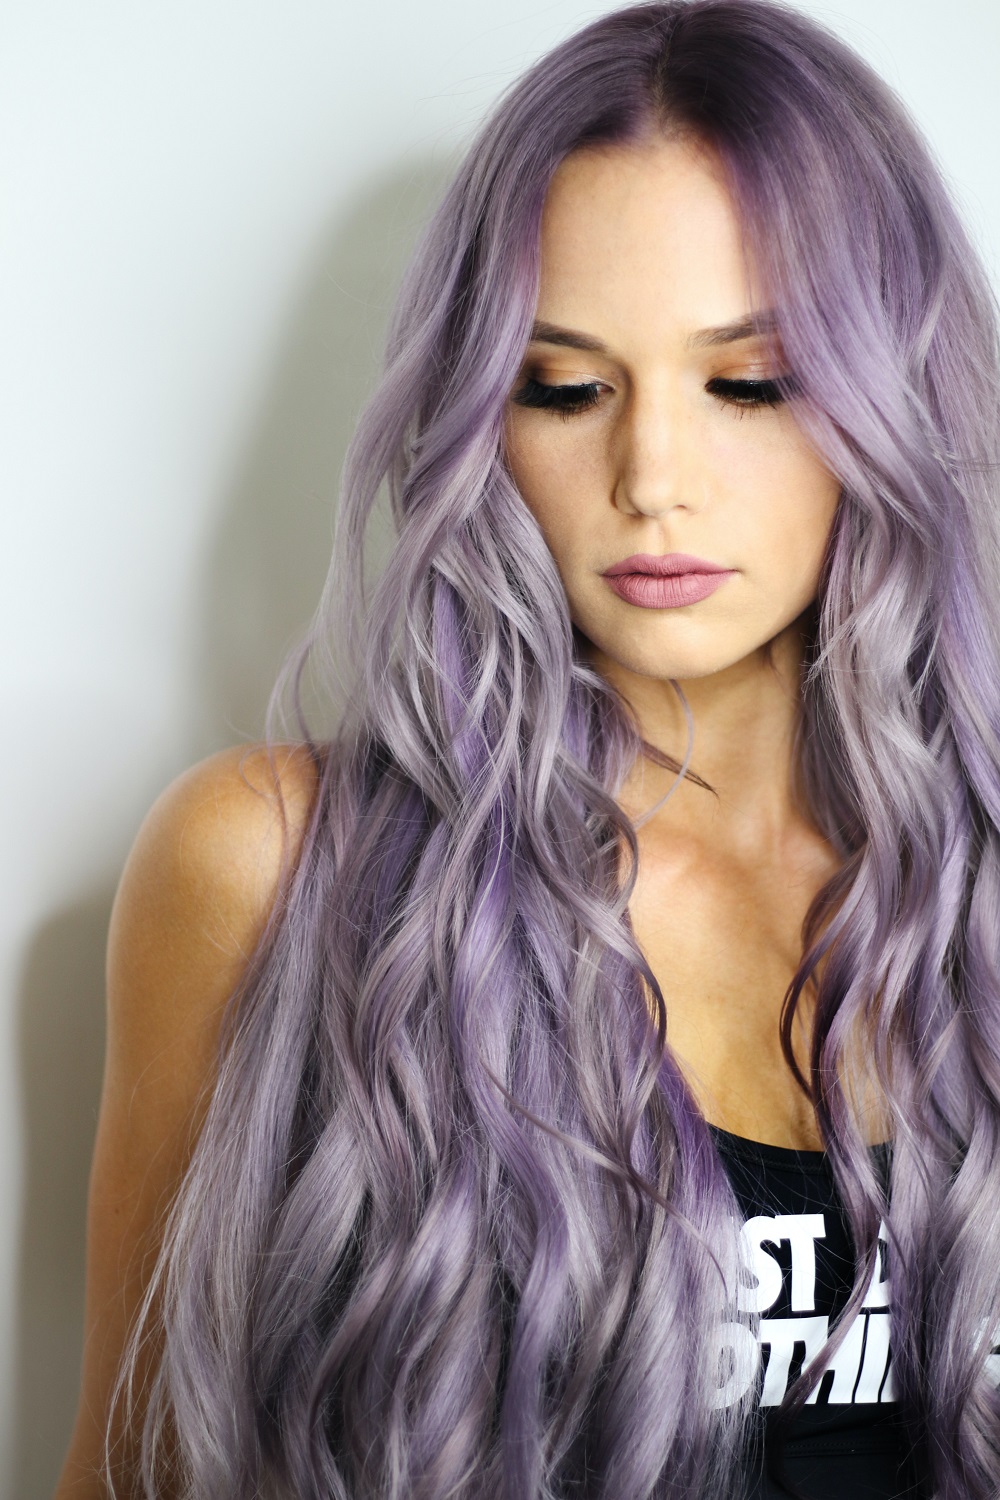 Best Styling Tips for 100% Human Hair Extensions